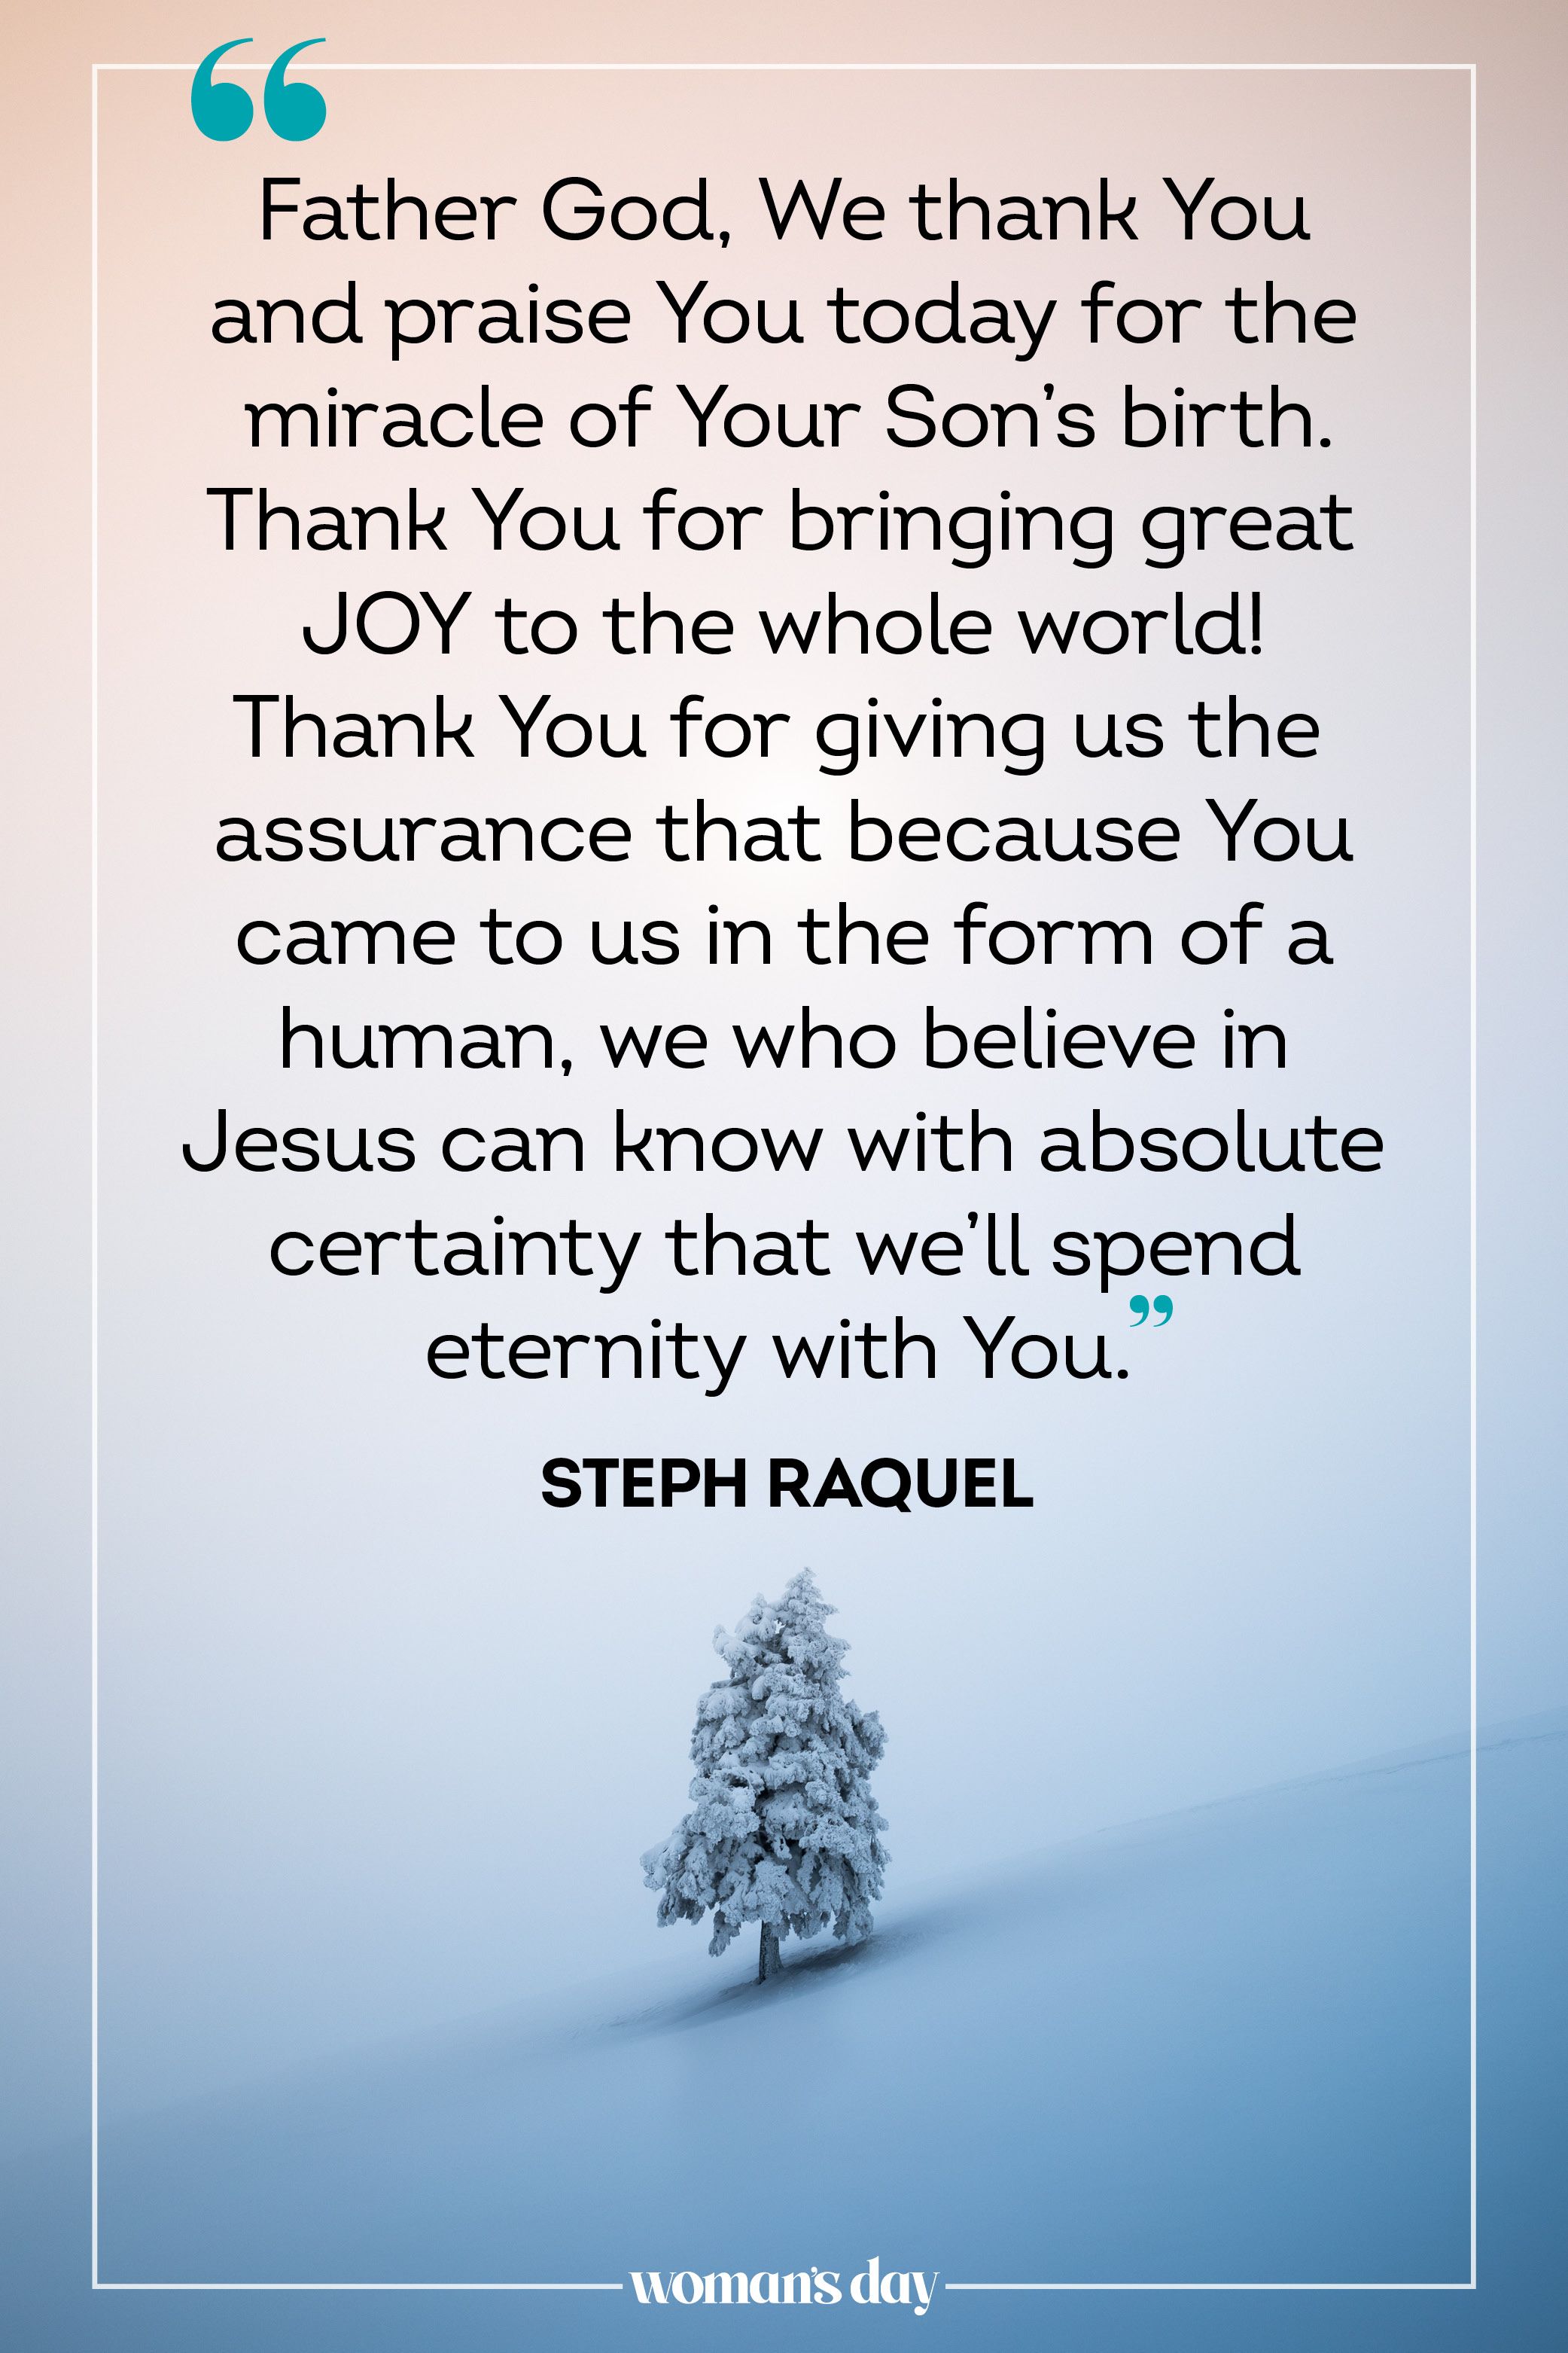 25 Best Christmas Prayers Blessings For The Whole Family